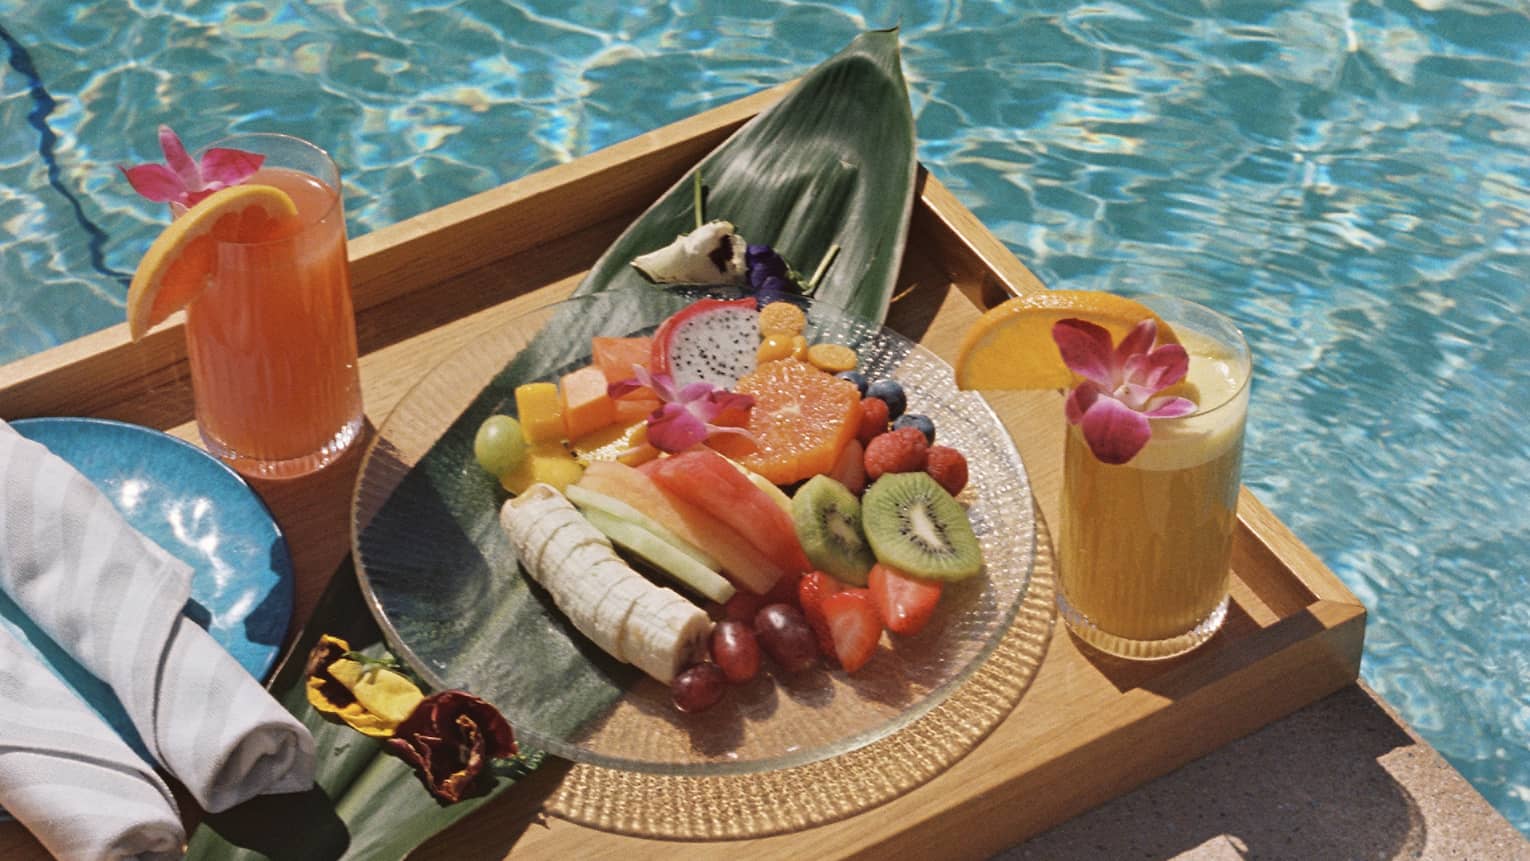 Tray of food and drinks by the pool.